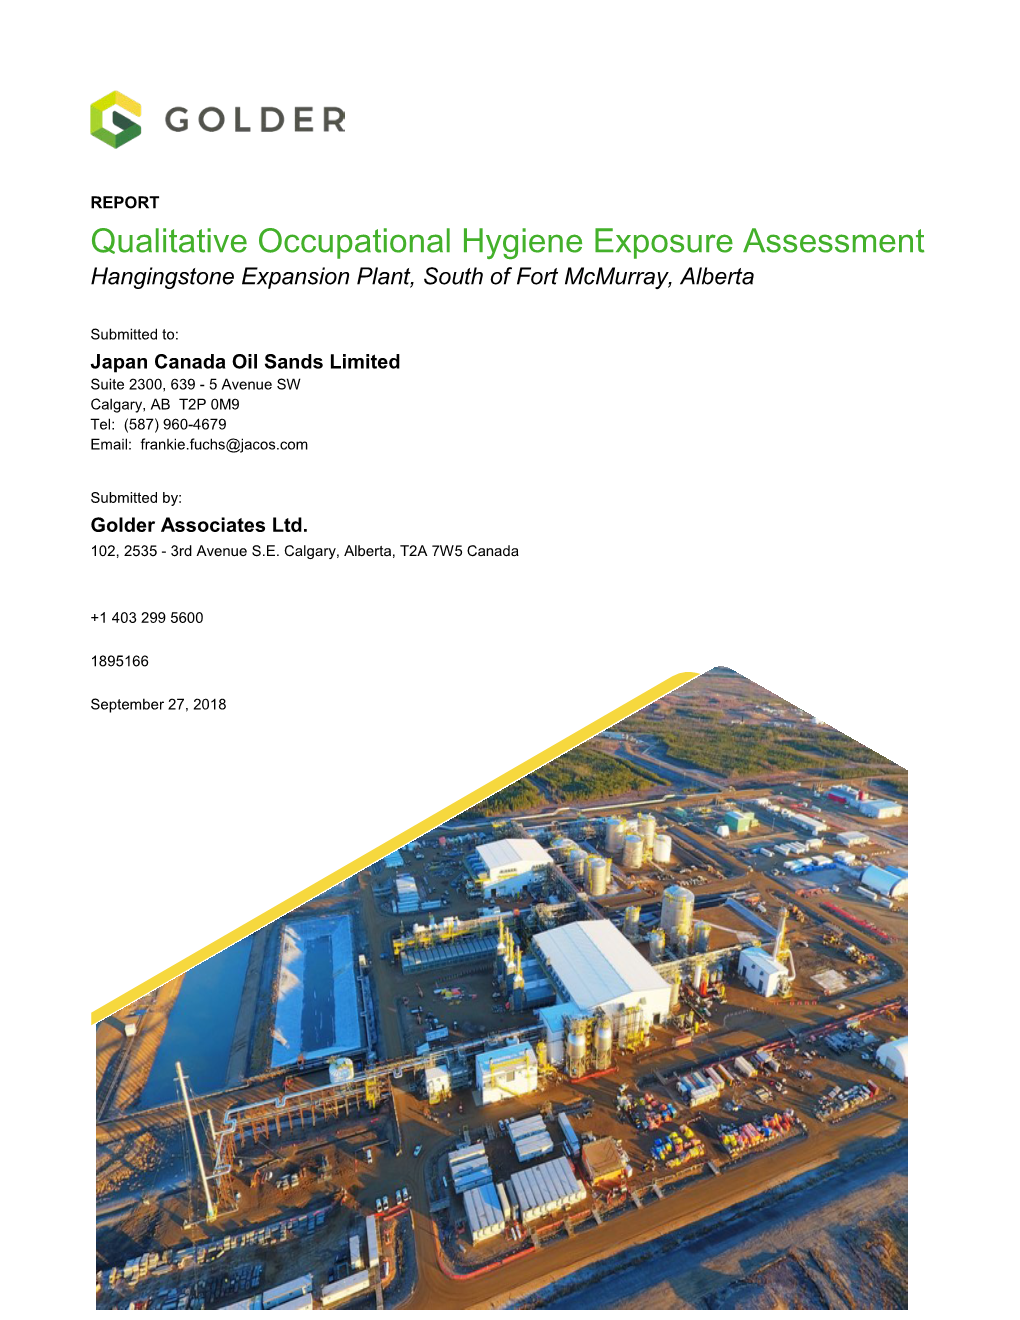 Qualitative Occupational Hygiene Exposure Assessment Hangingstone Expansion Plant, South of Fort Mcmurray, Alberta